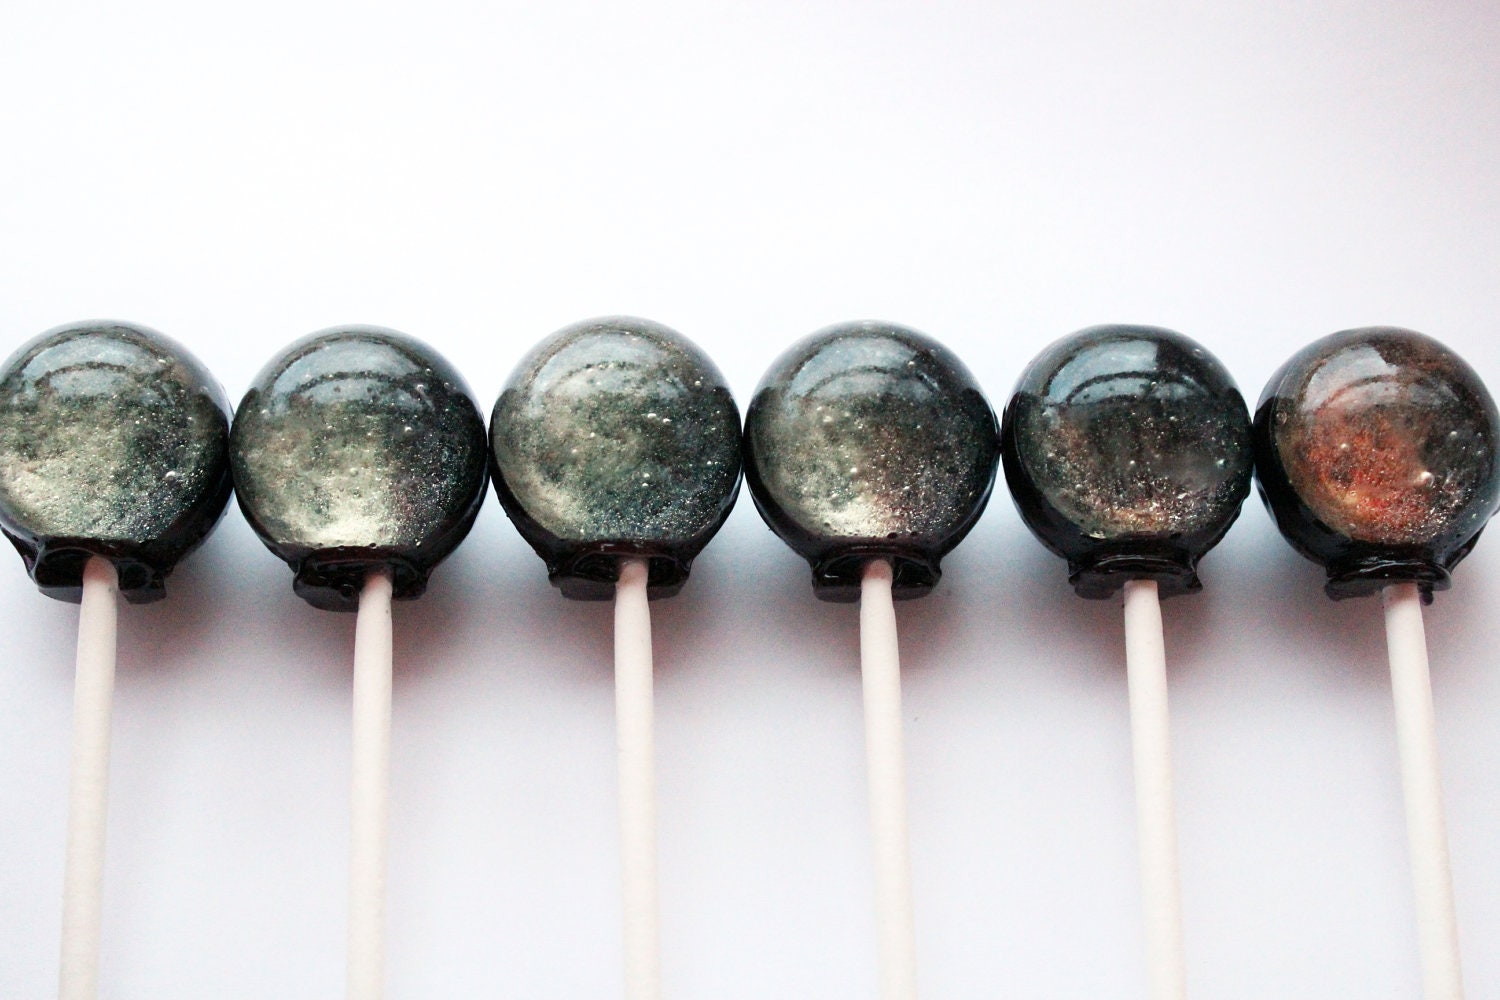 Original phases of the moon lunar eclipse space edible images hard candy lollipop - 6 pc. - MADE TO ORDER - VintageConfections